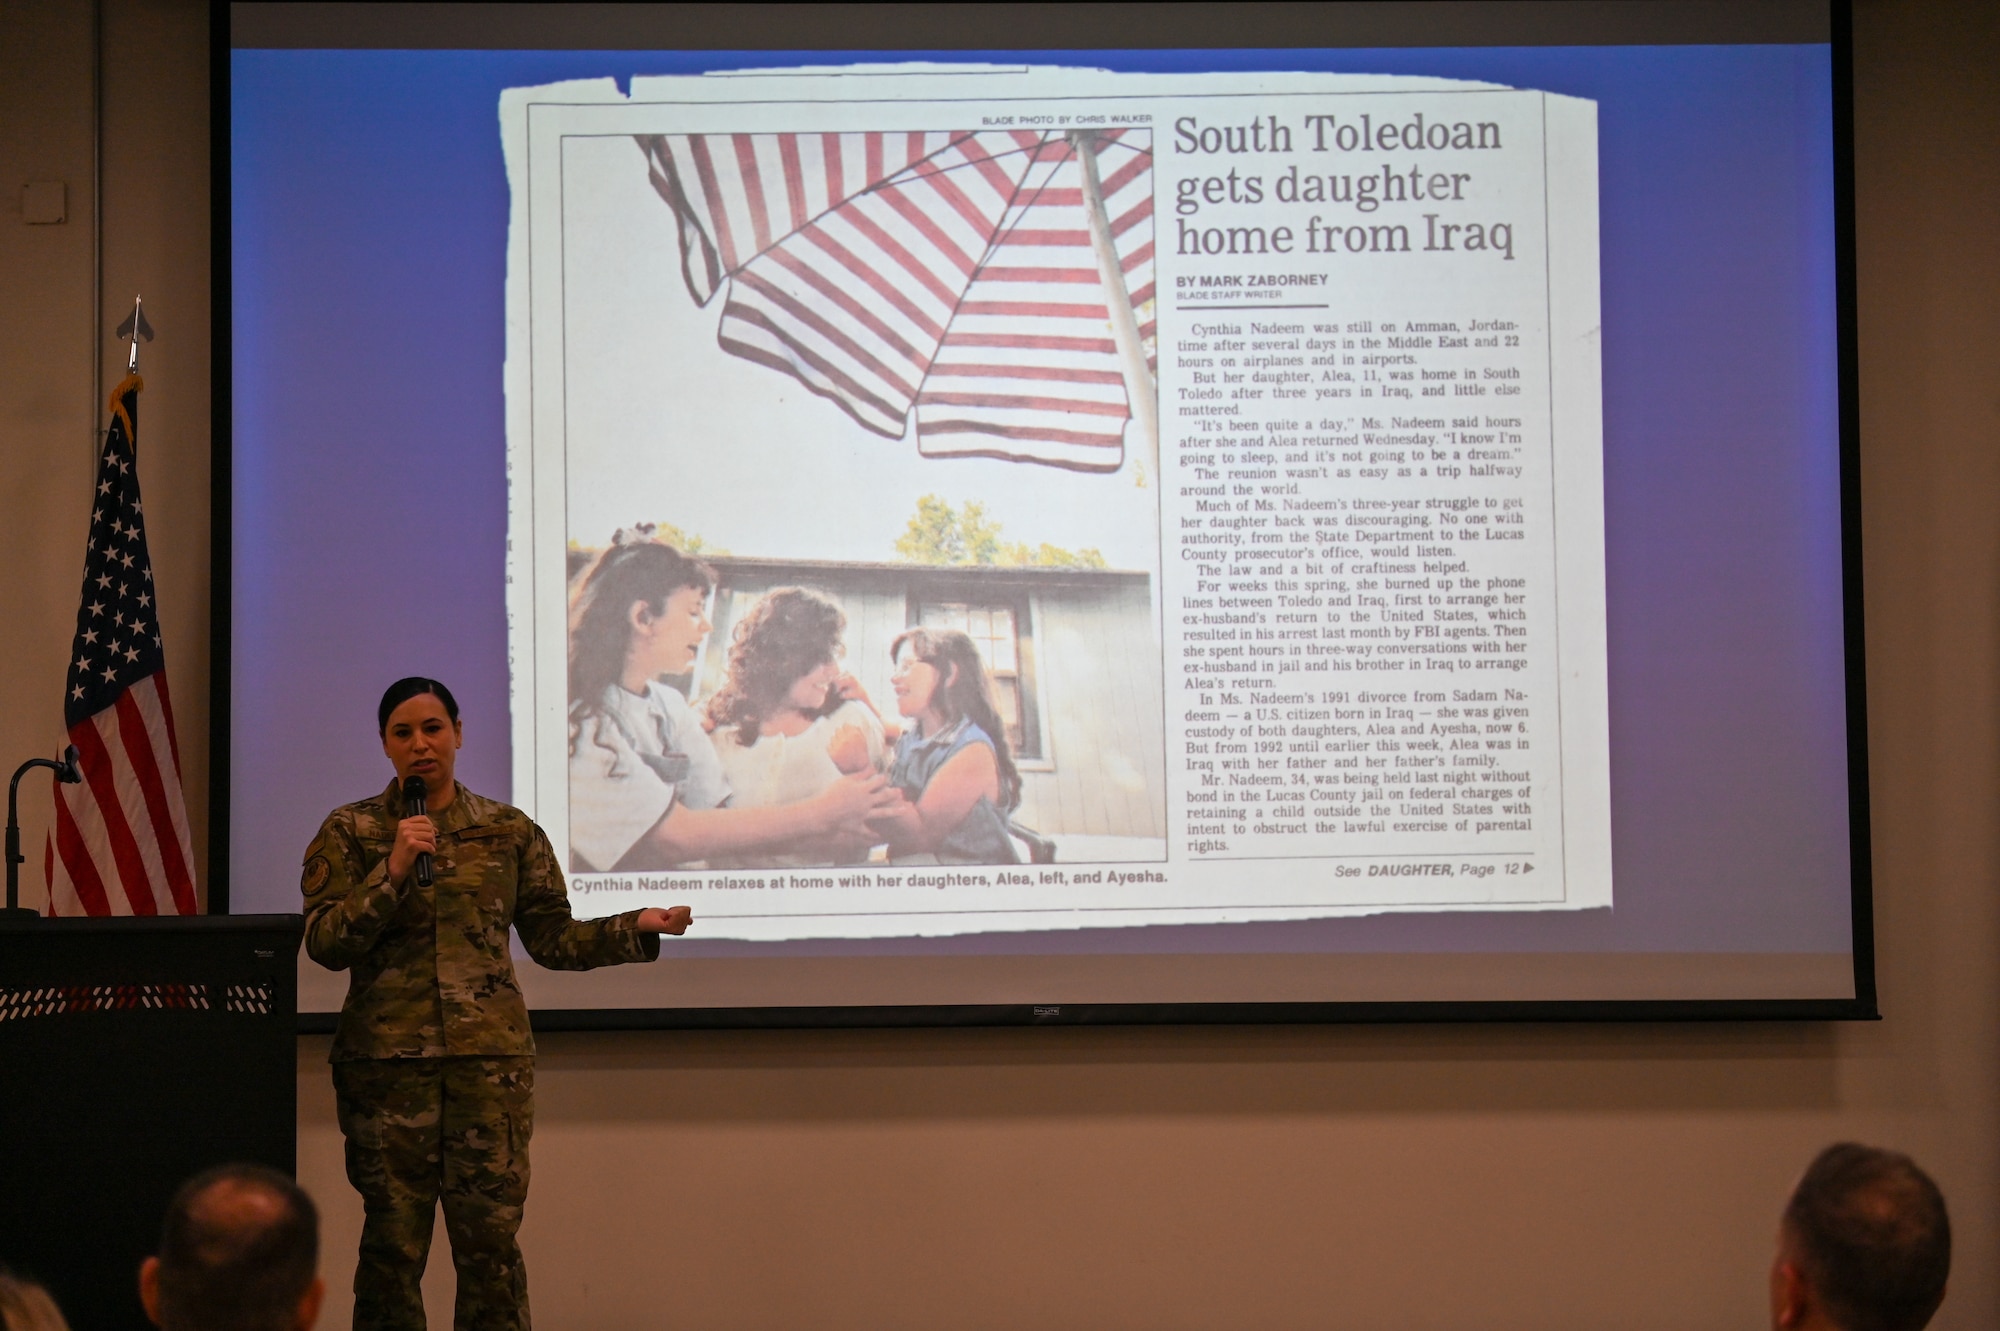 U.S. Air Force Maj. gives speaks during a presentation.